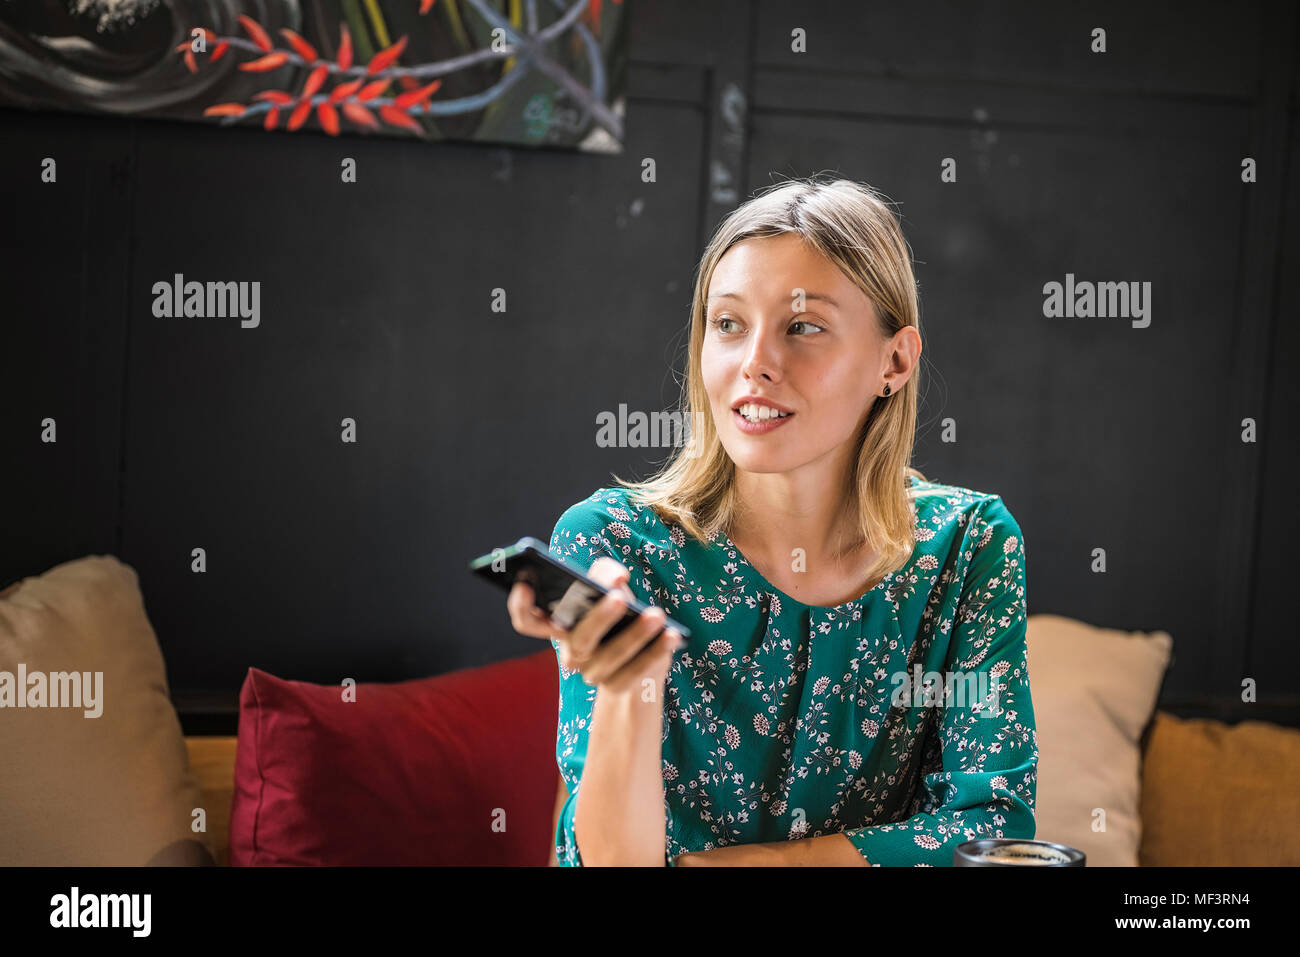 Young smiling woman with green dress sitting in cafe, tenant son smartphone Banque D'Images